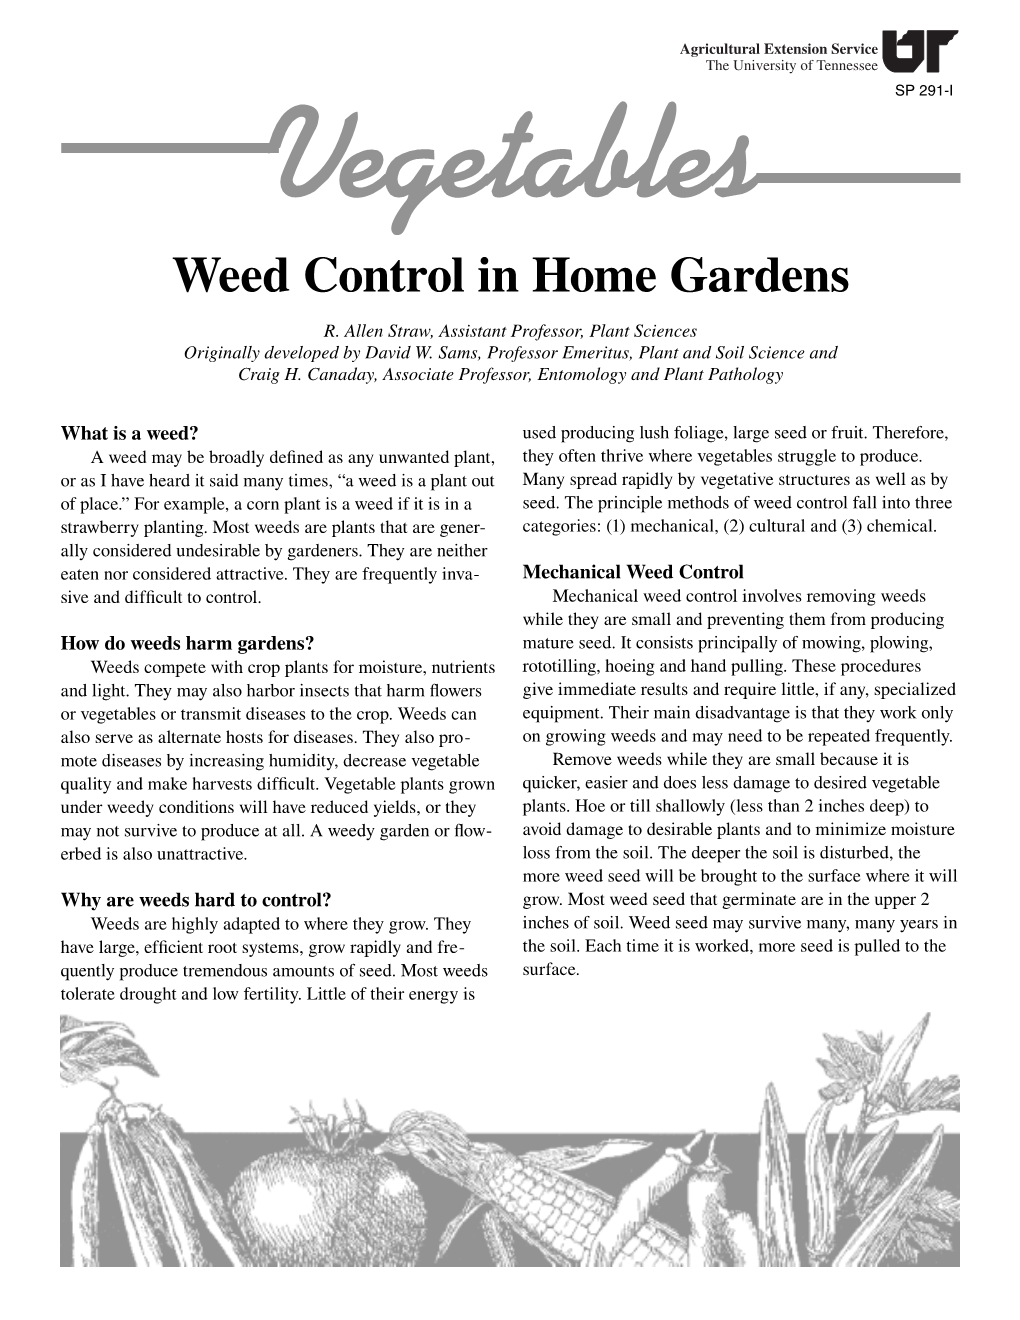 Weed Control in Home Gardens, SP291-I